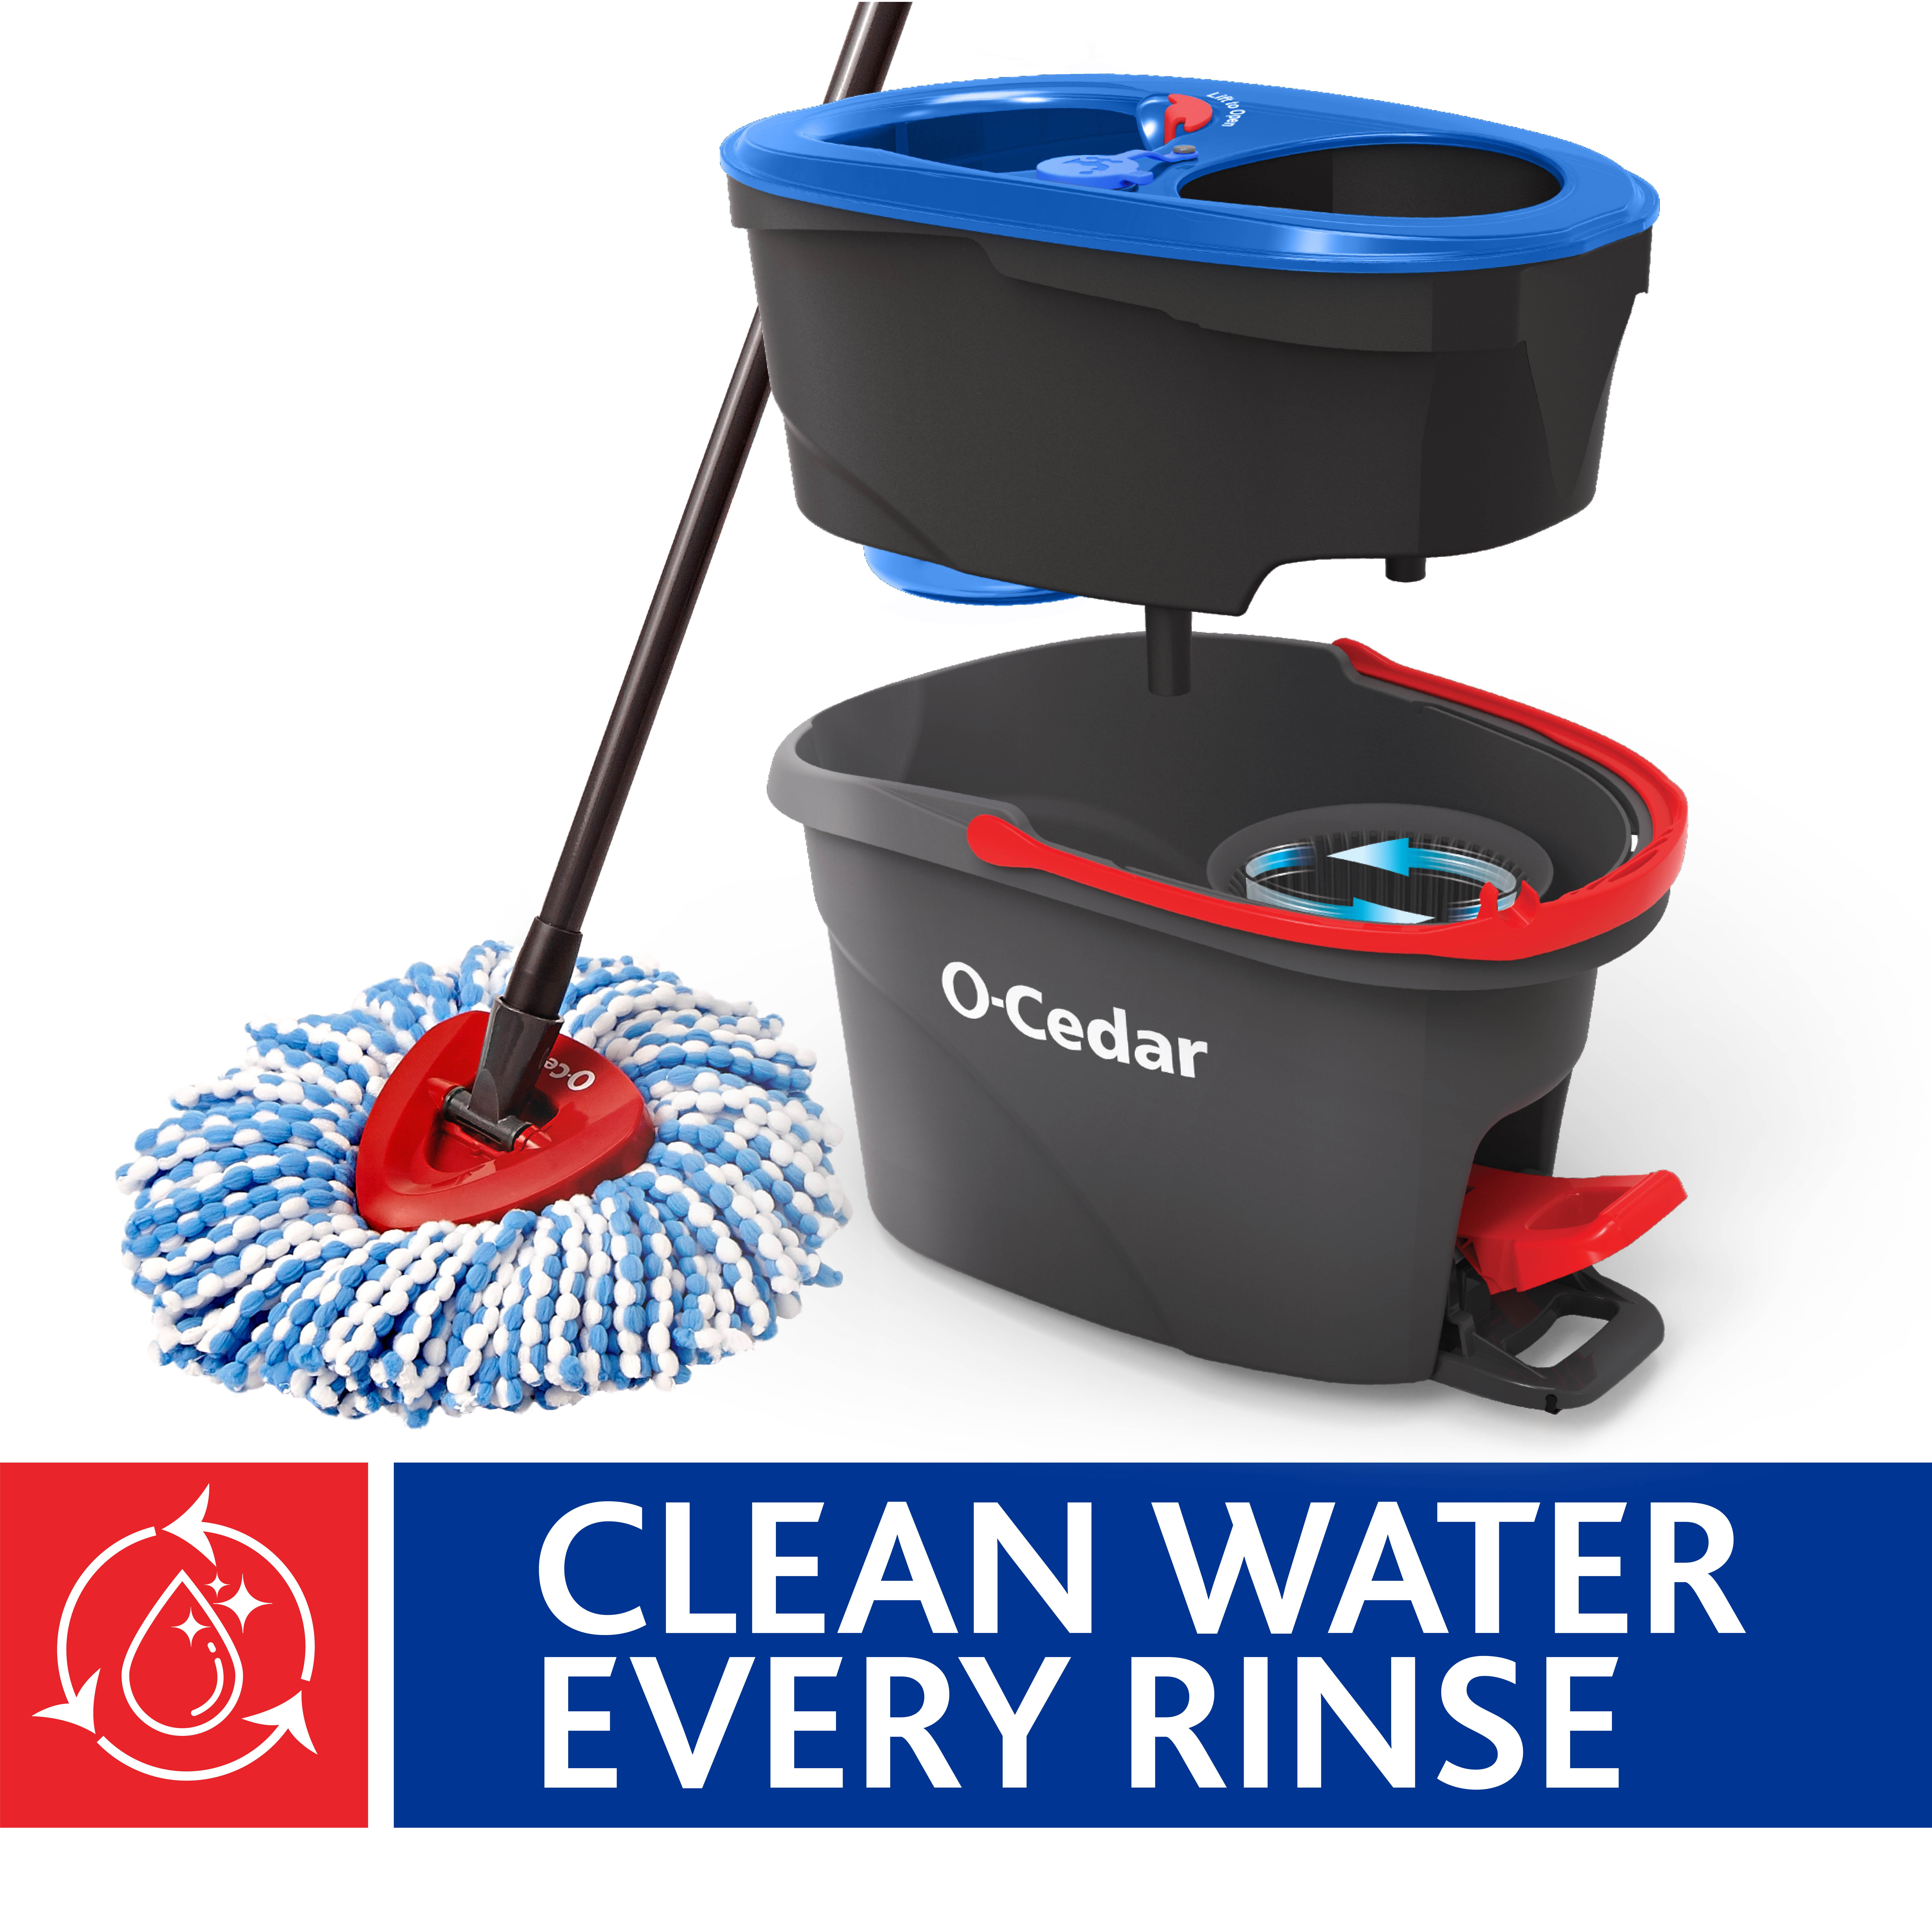 O-Cedar Easy Wring Spin Mop Bucket System Hard Floor Wet Home Cleaning Tools 